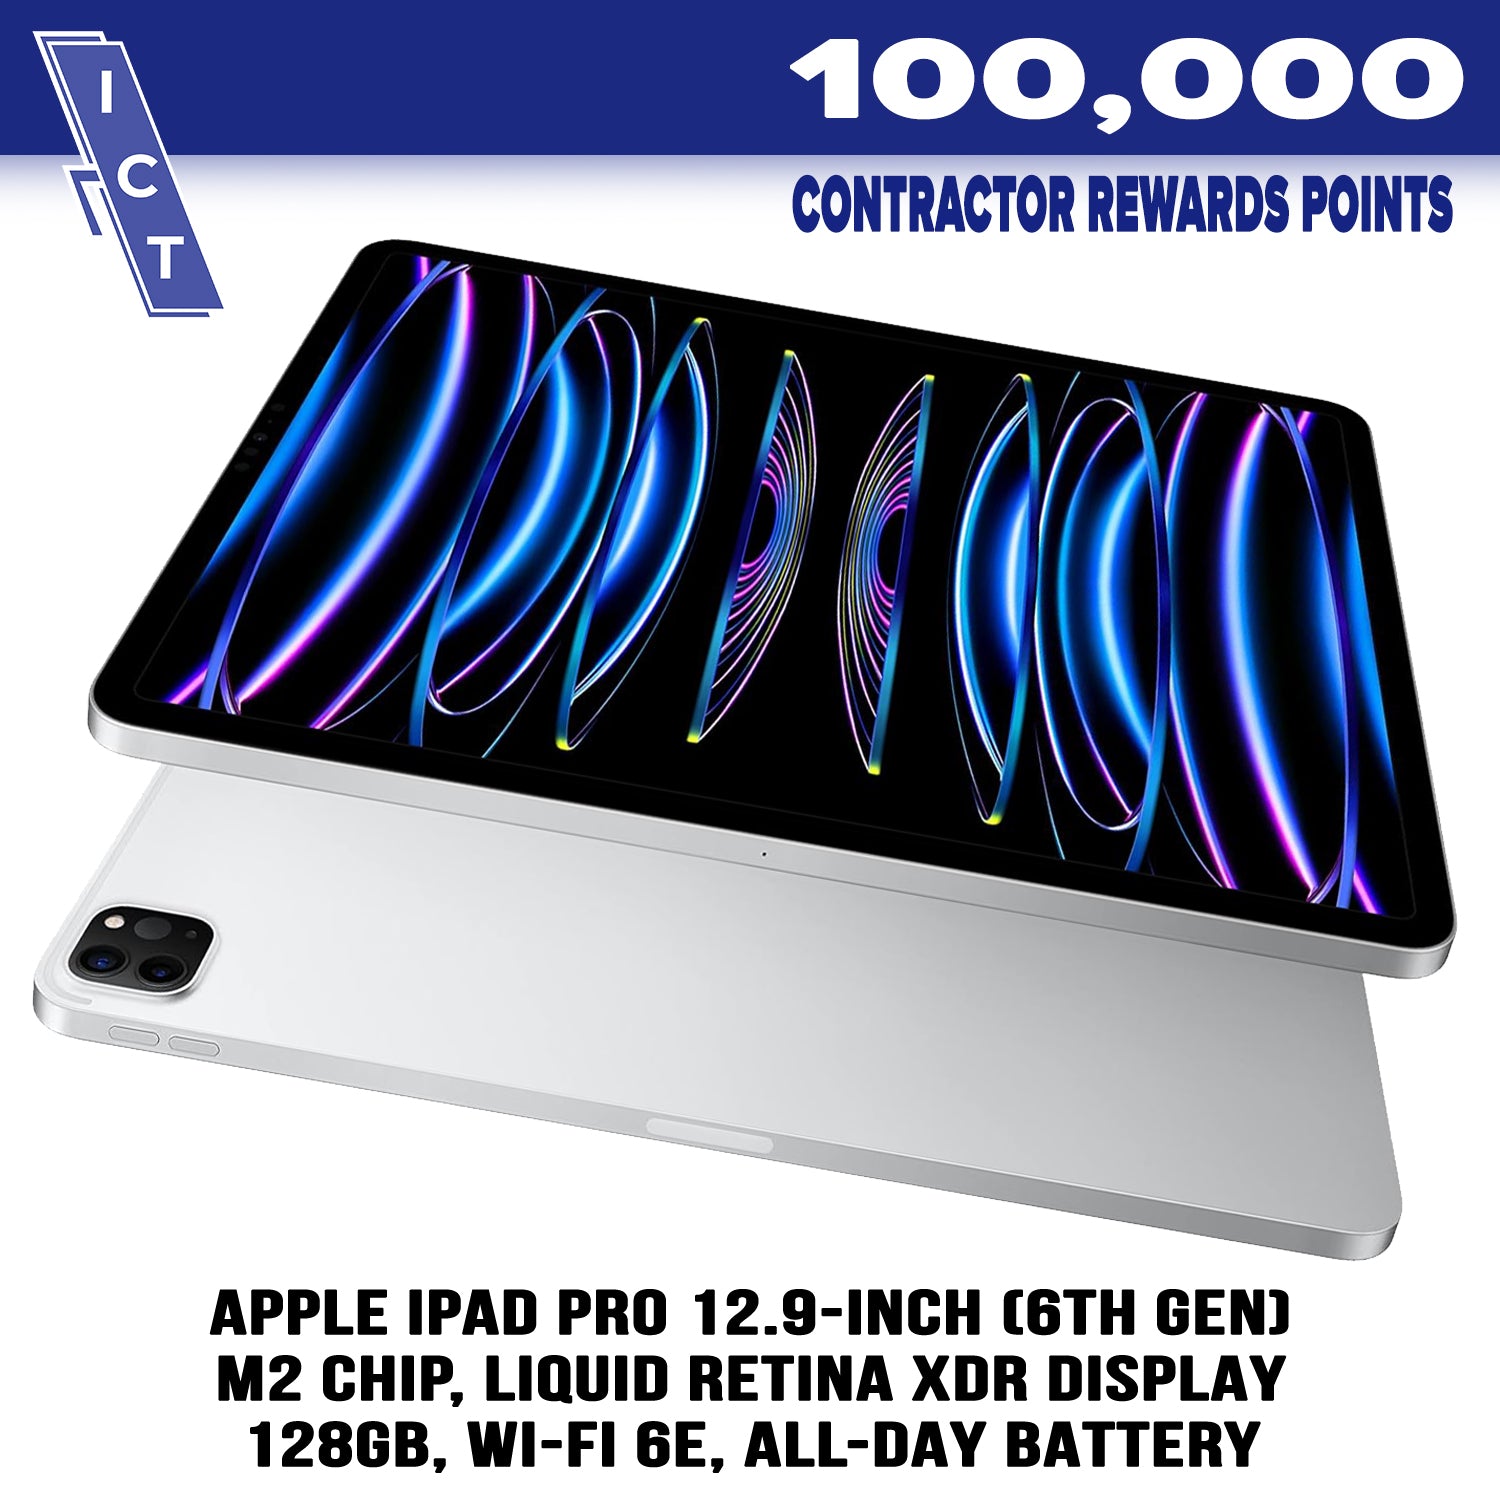 Apple iPad Pro prize for 100000 points